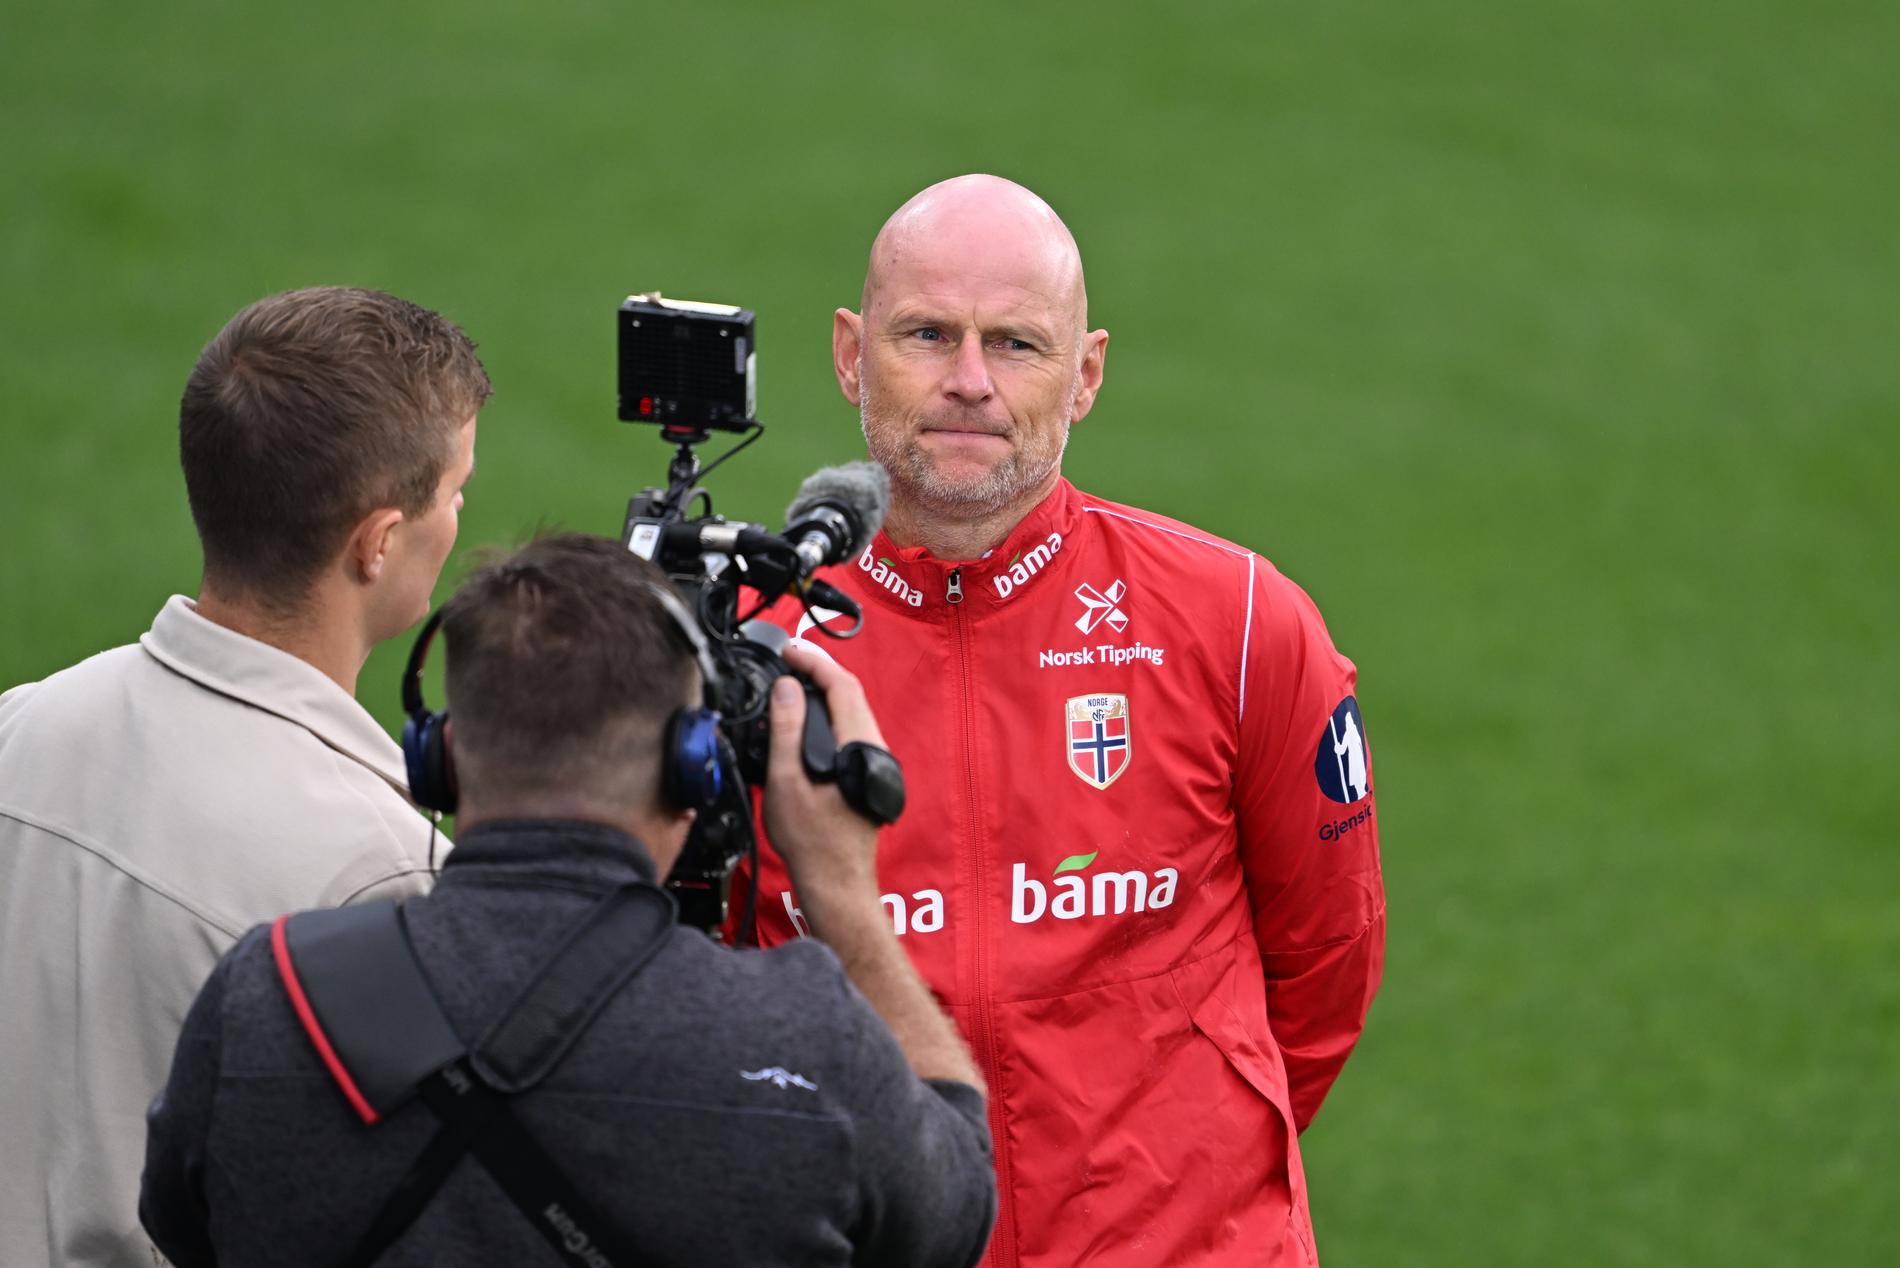 European Championship qualifiers: Norway-Georgia match could be fatal for Stal Solbakken